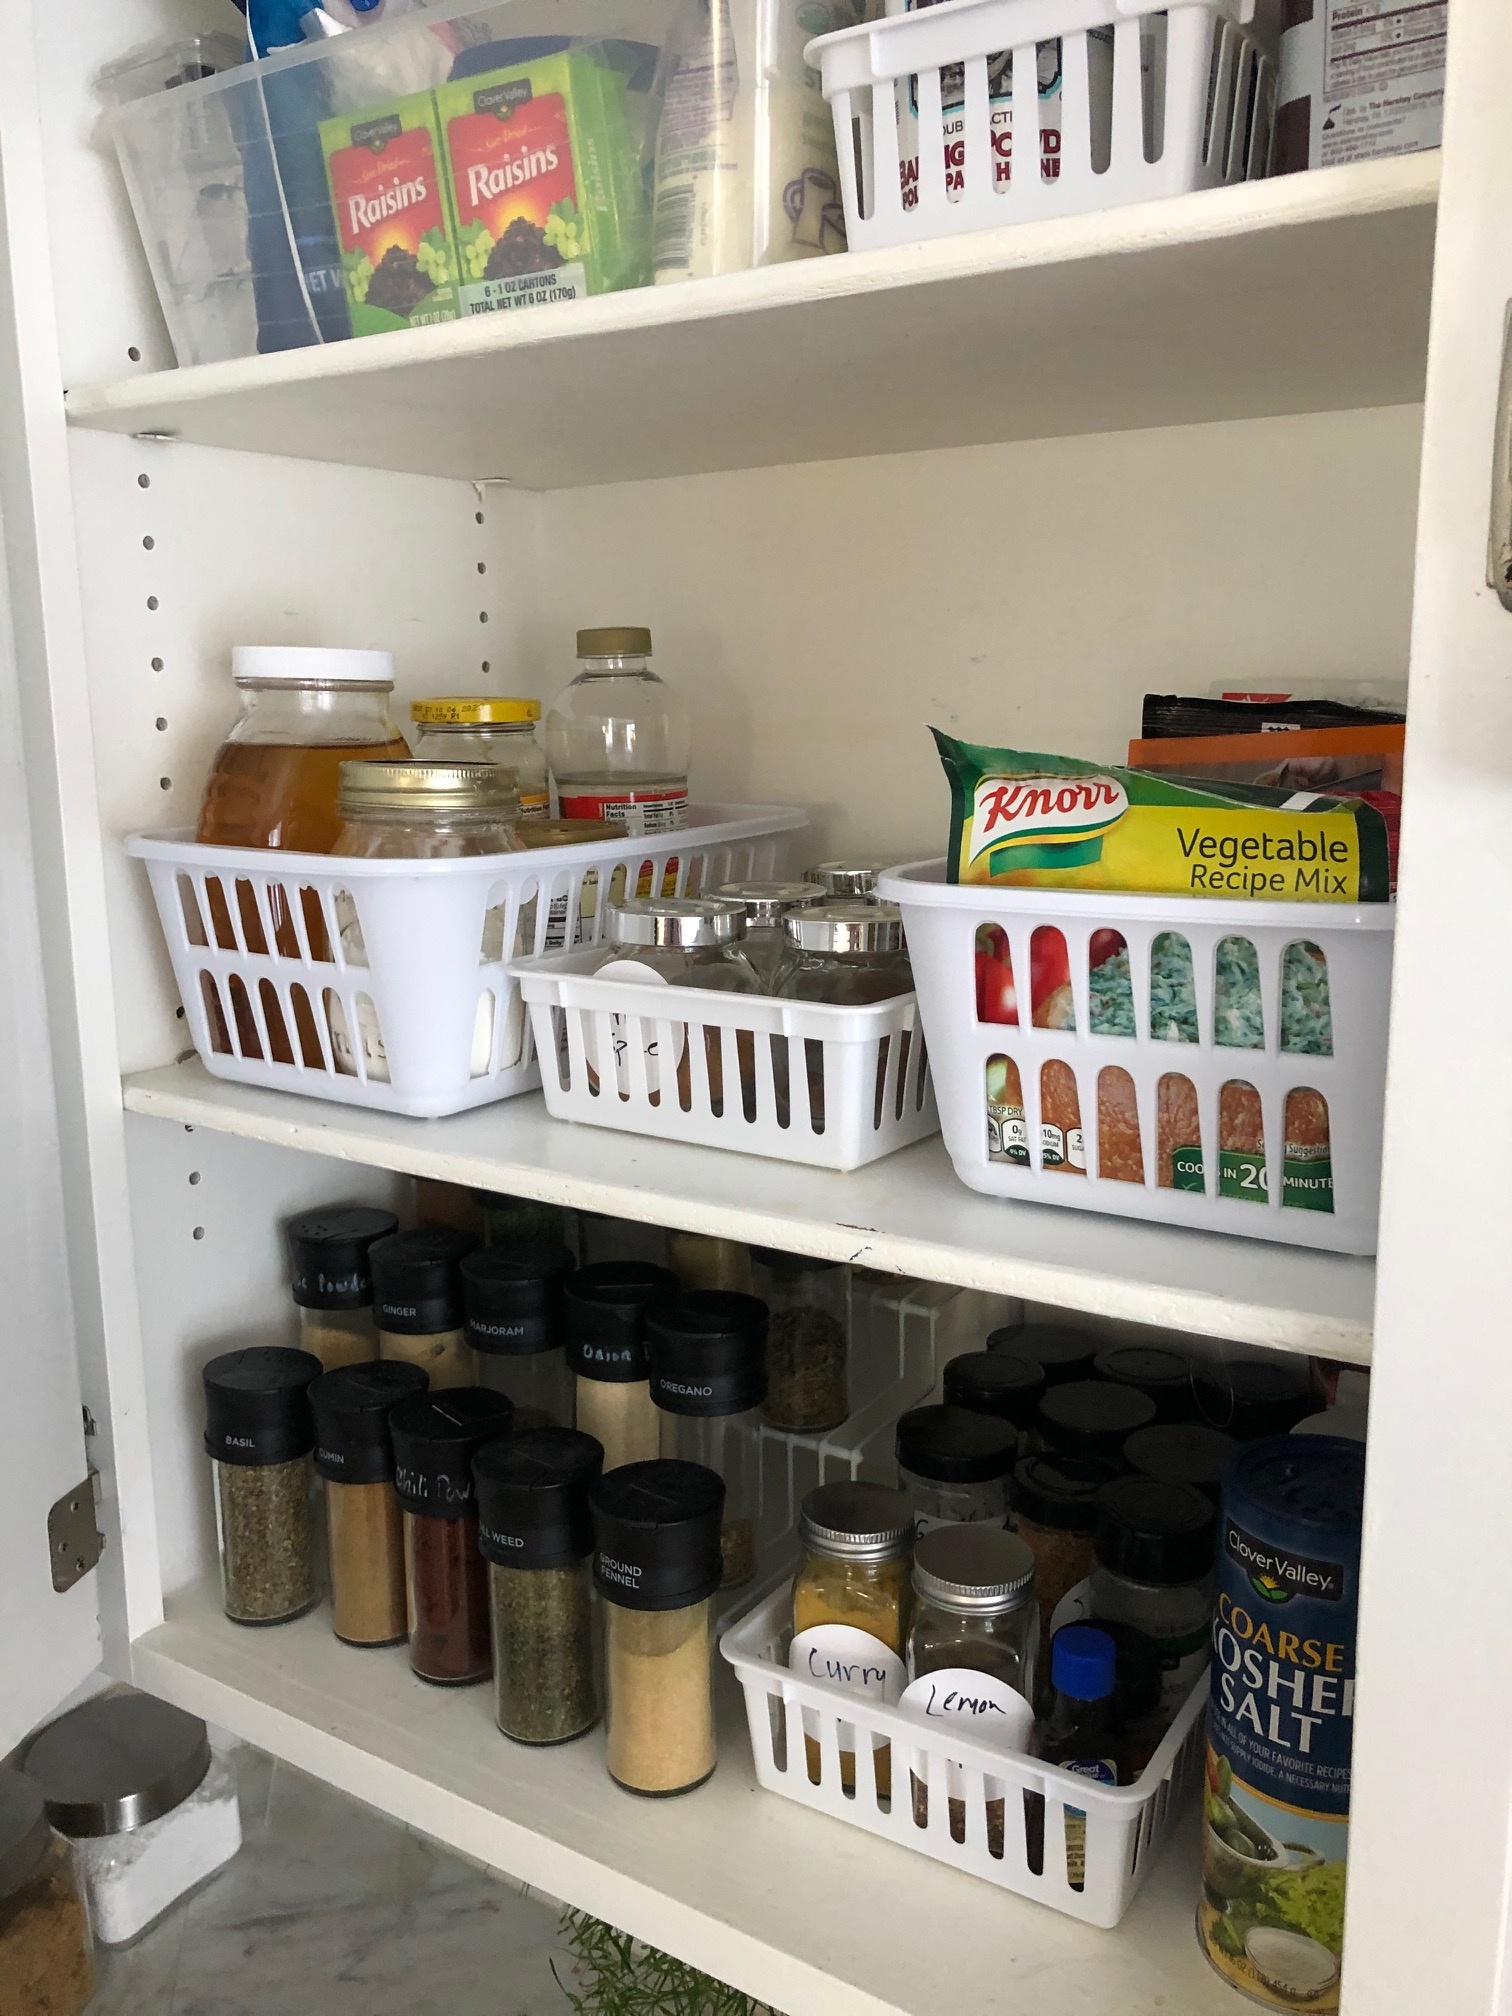 Tips on Organizing a Spice and Baking Cabinet - Pallet and Pantry